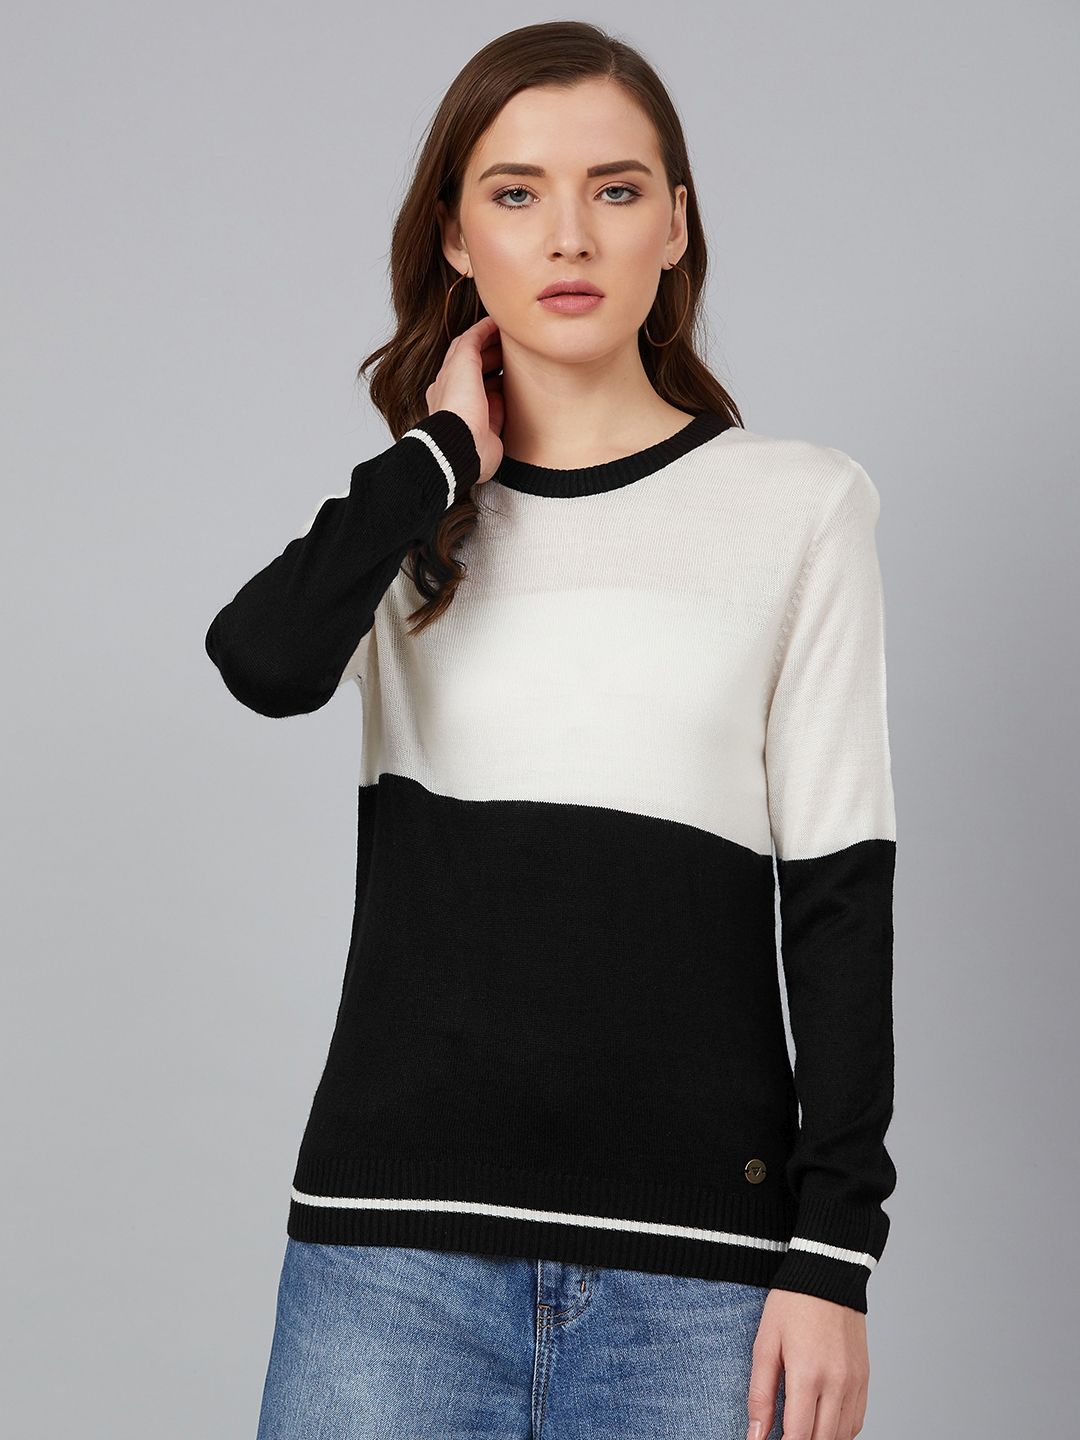 Cayman Women Black & Off-White Colourblocked Pullover Acrylic Sweater Price in India